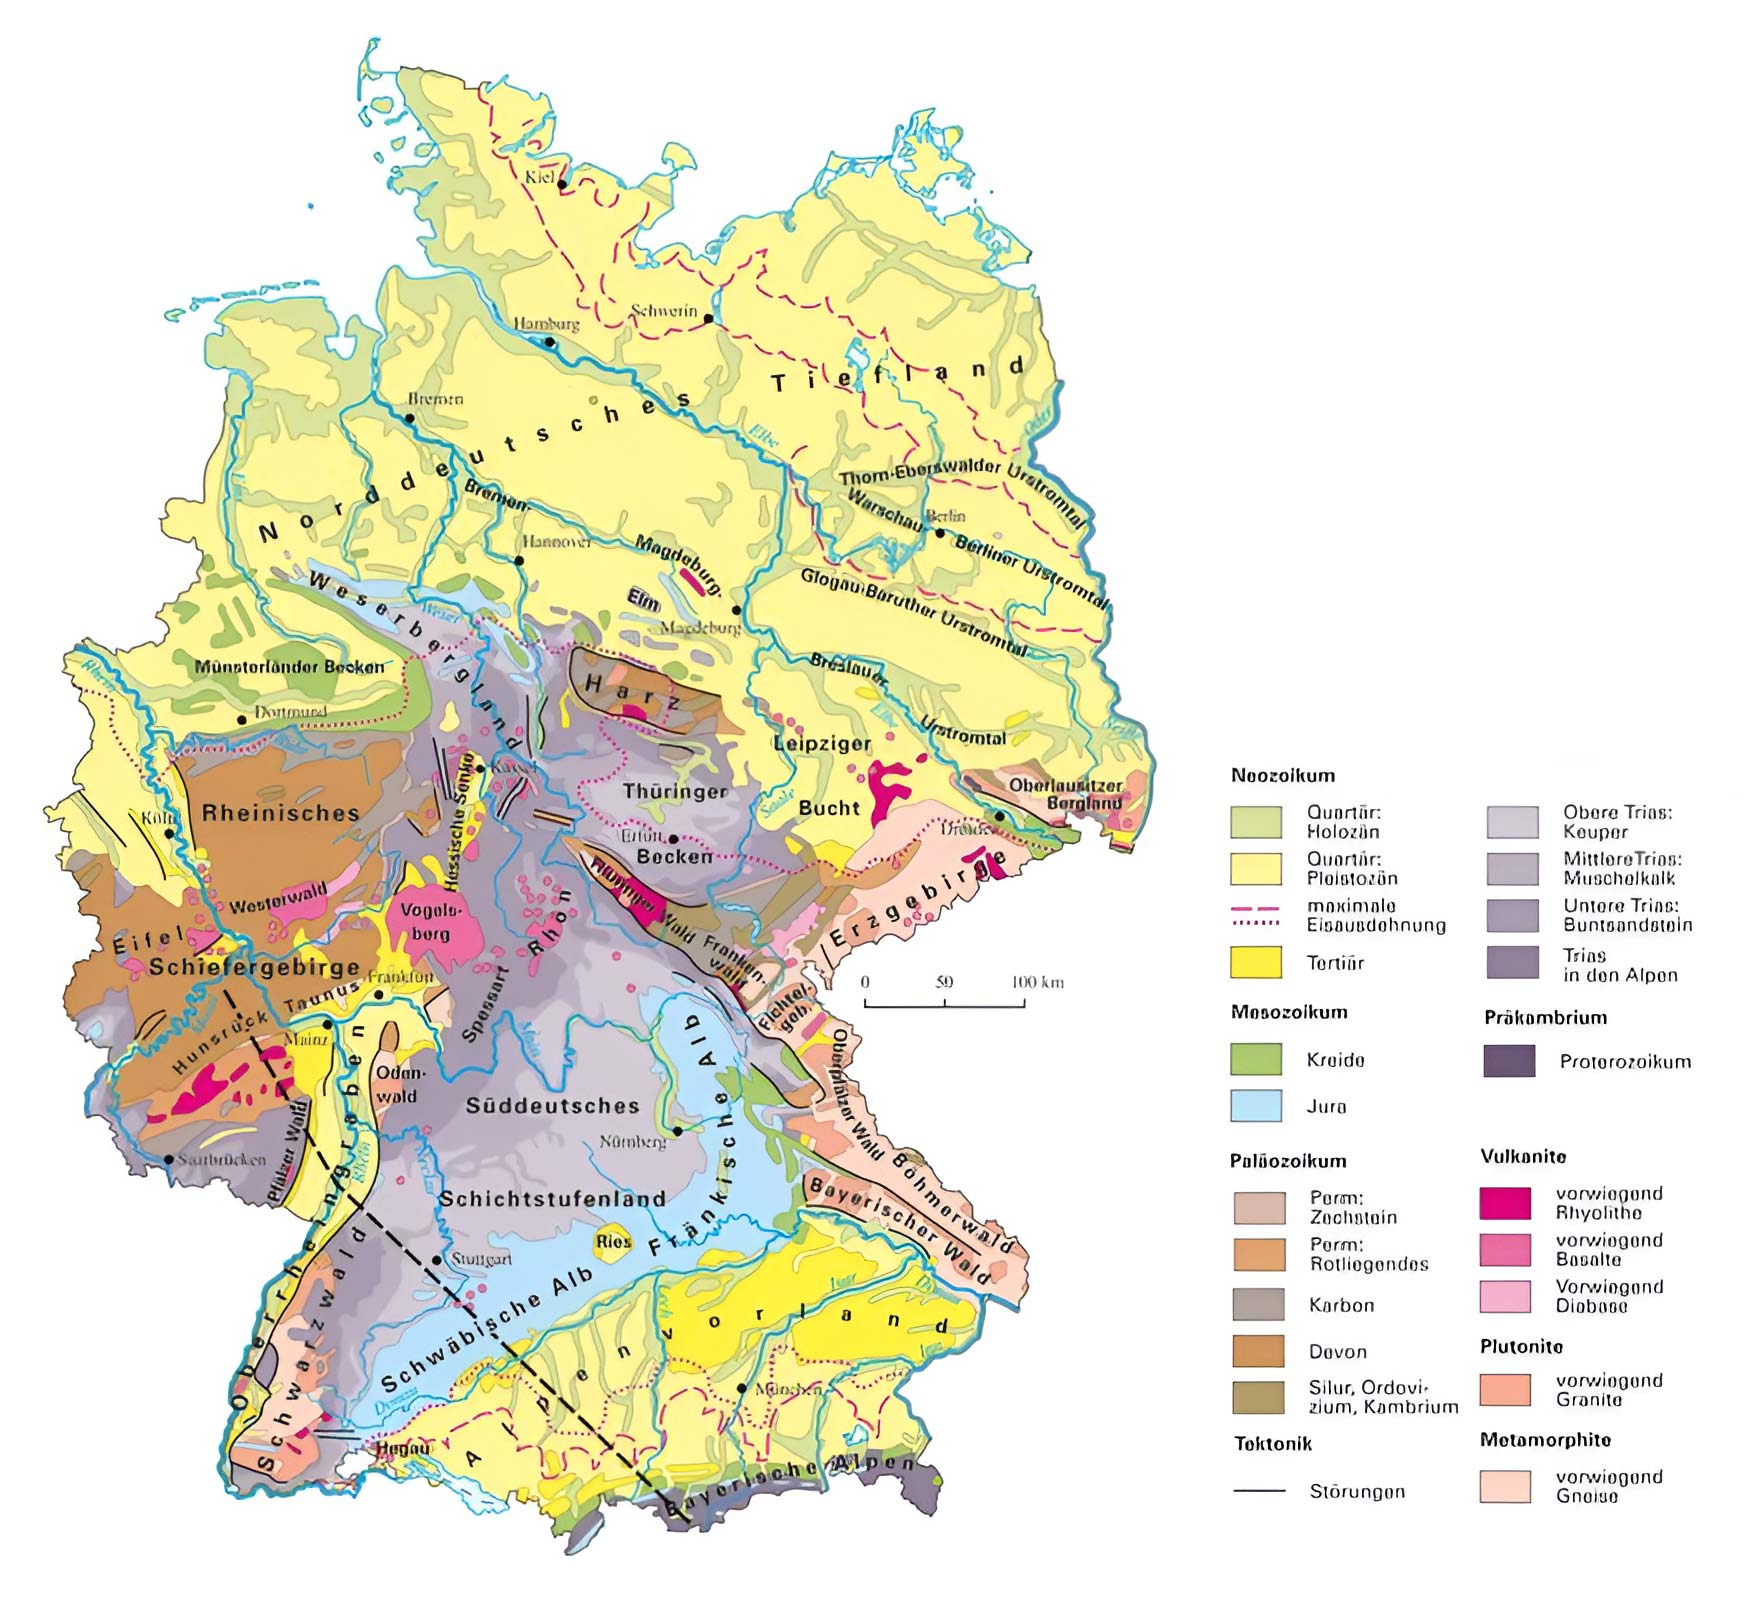 Germany Geological Map